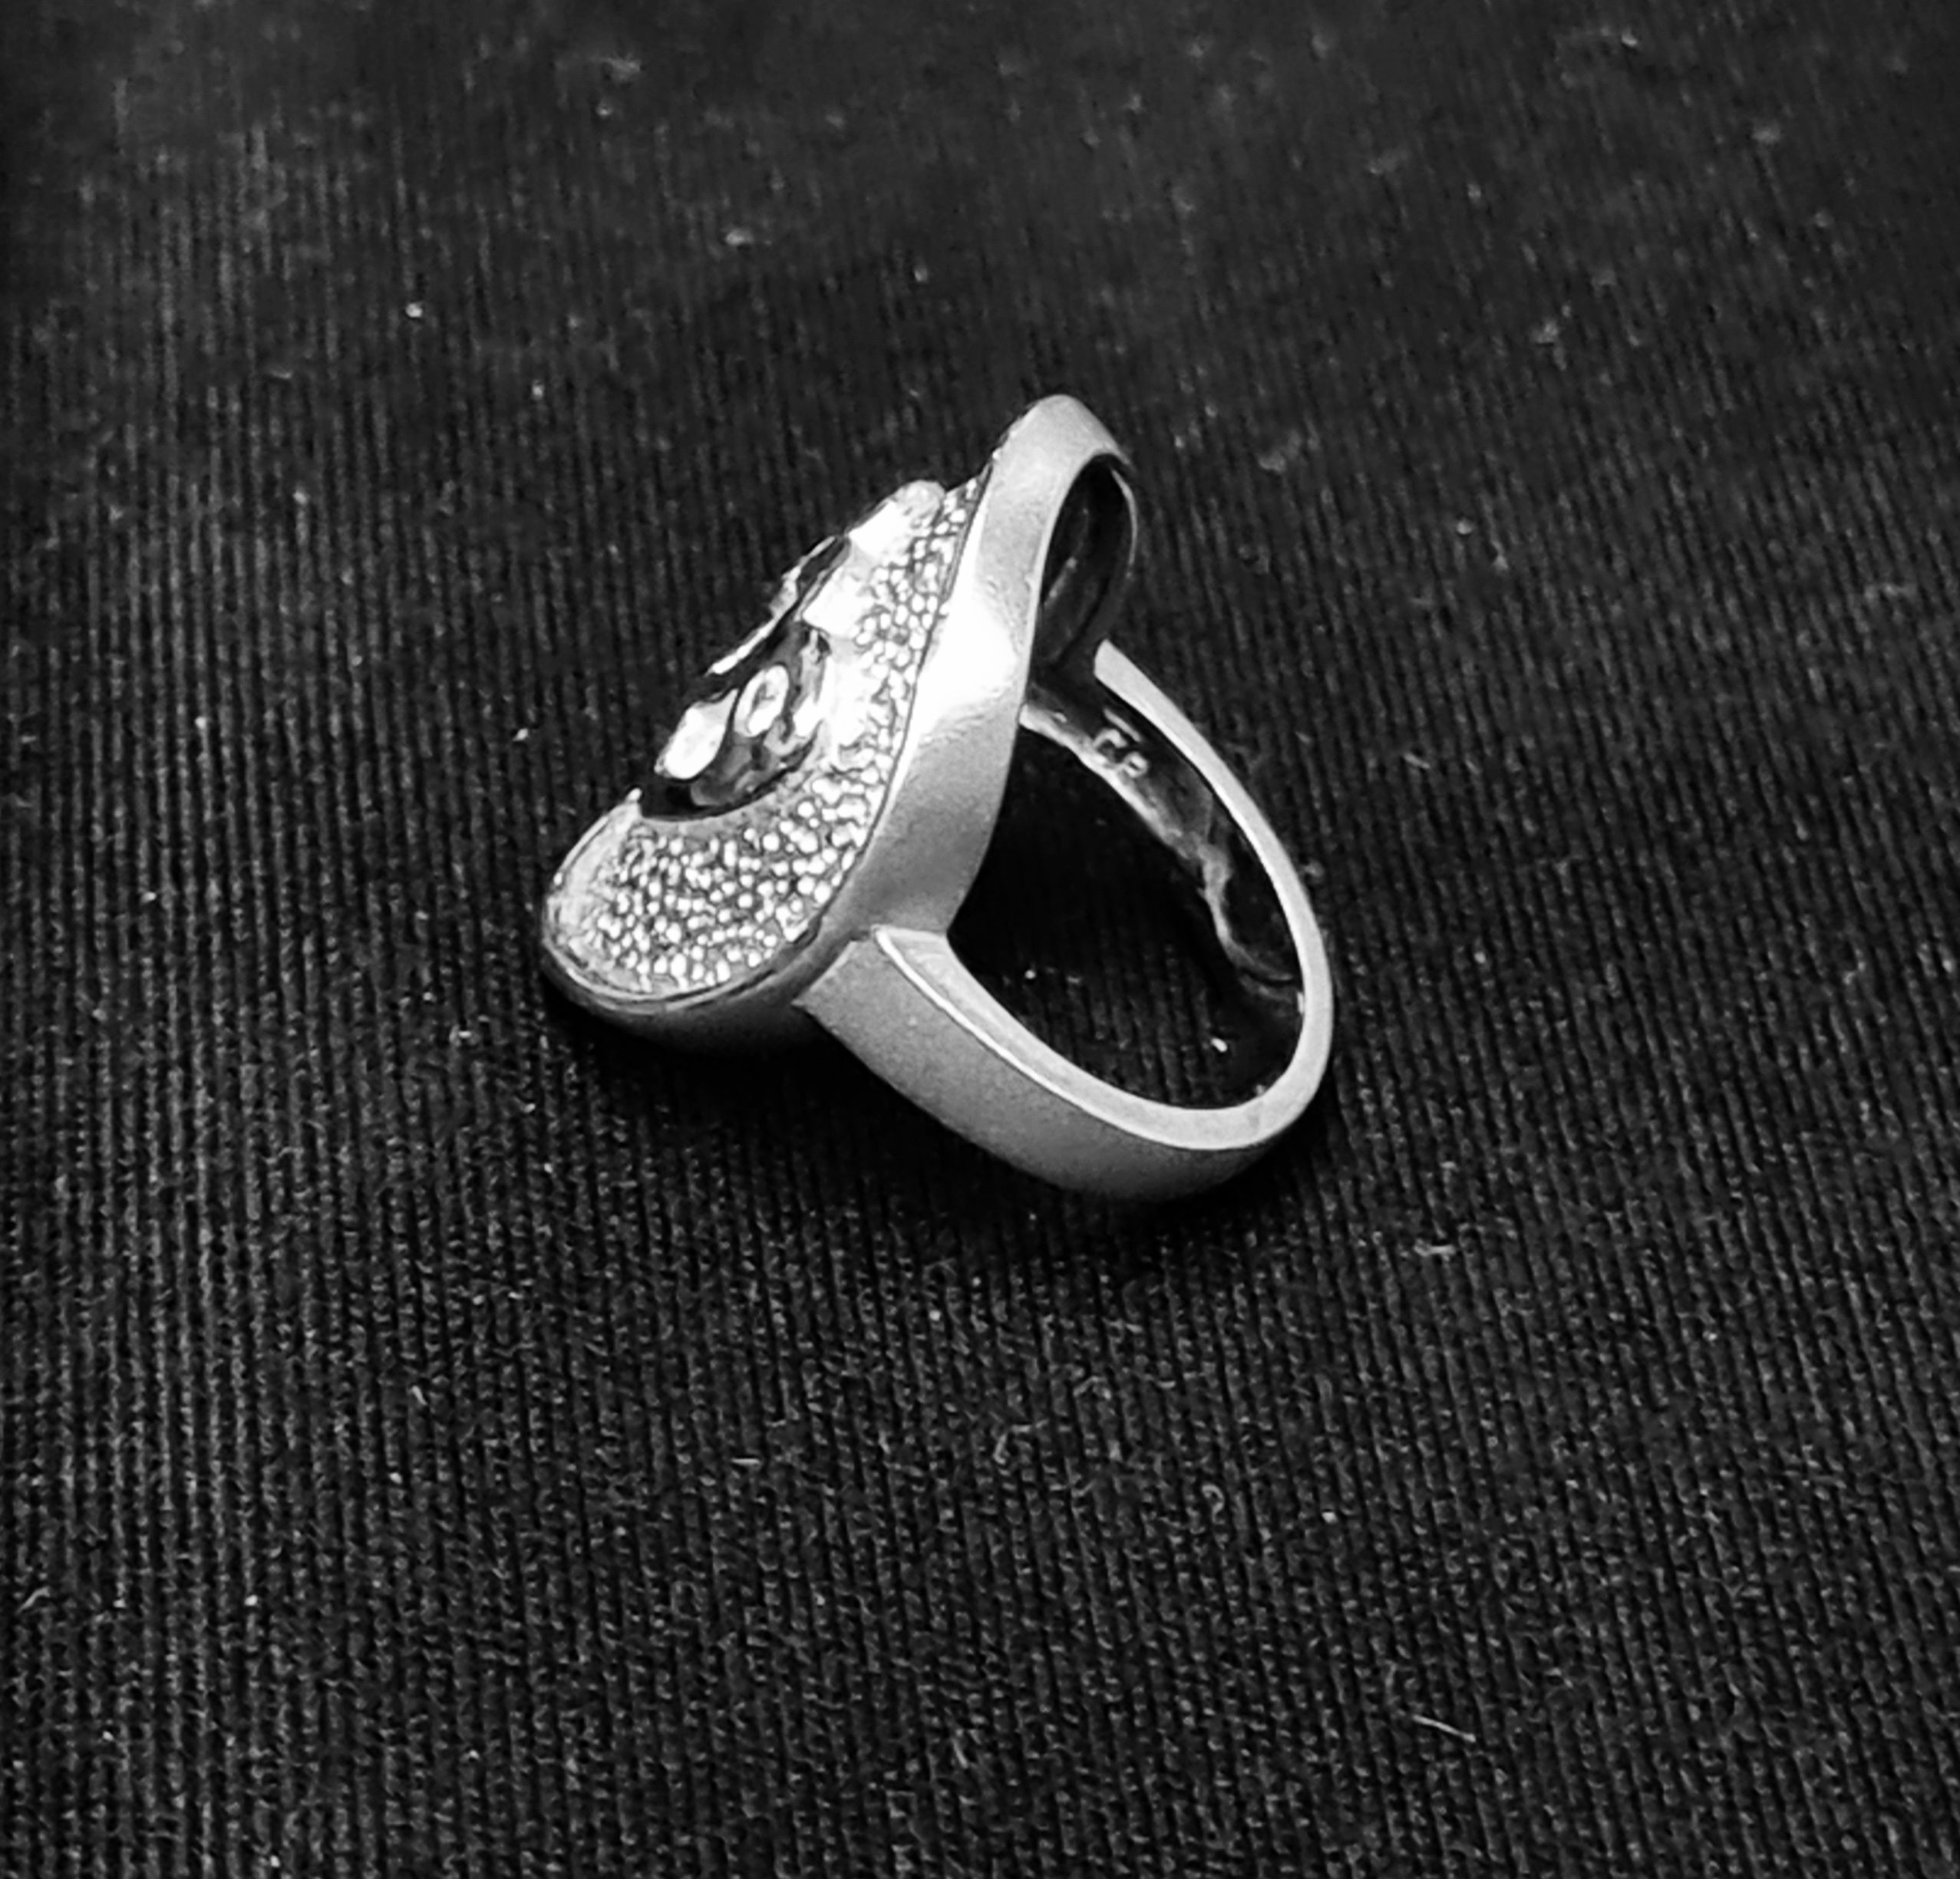 Artistic Sterling silver Ring